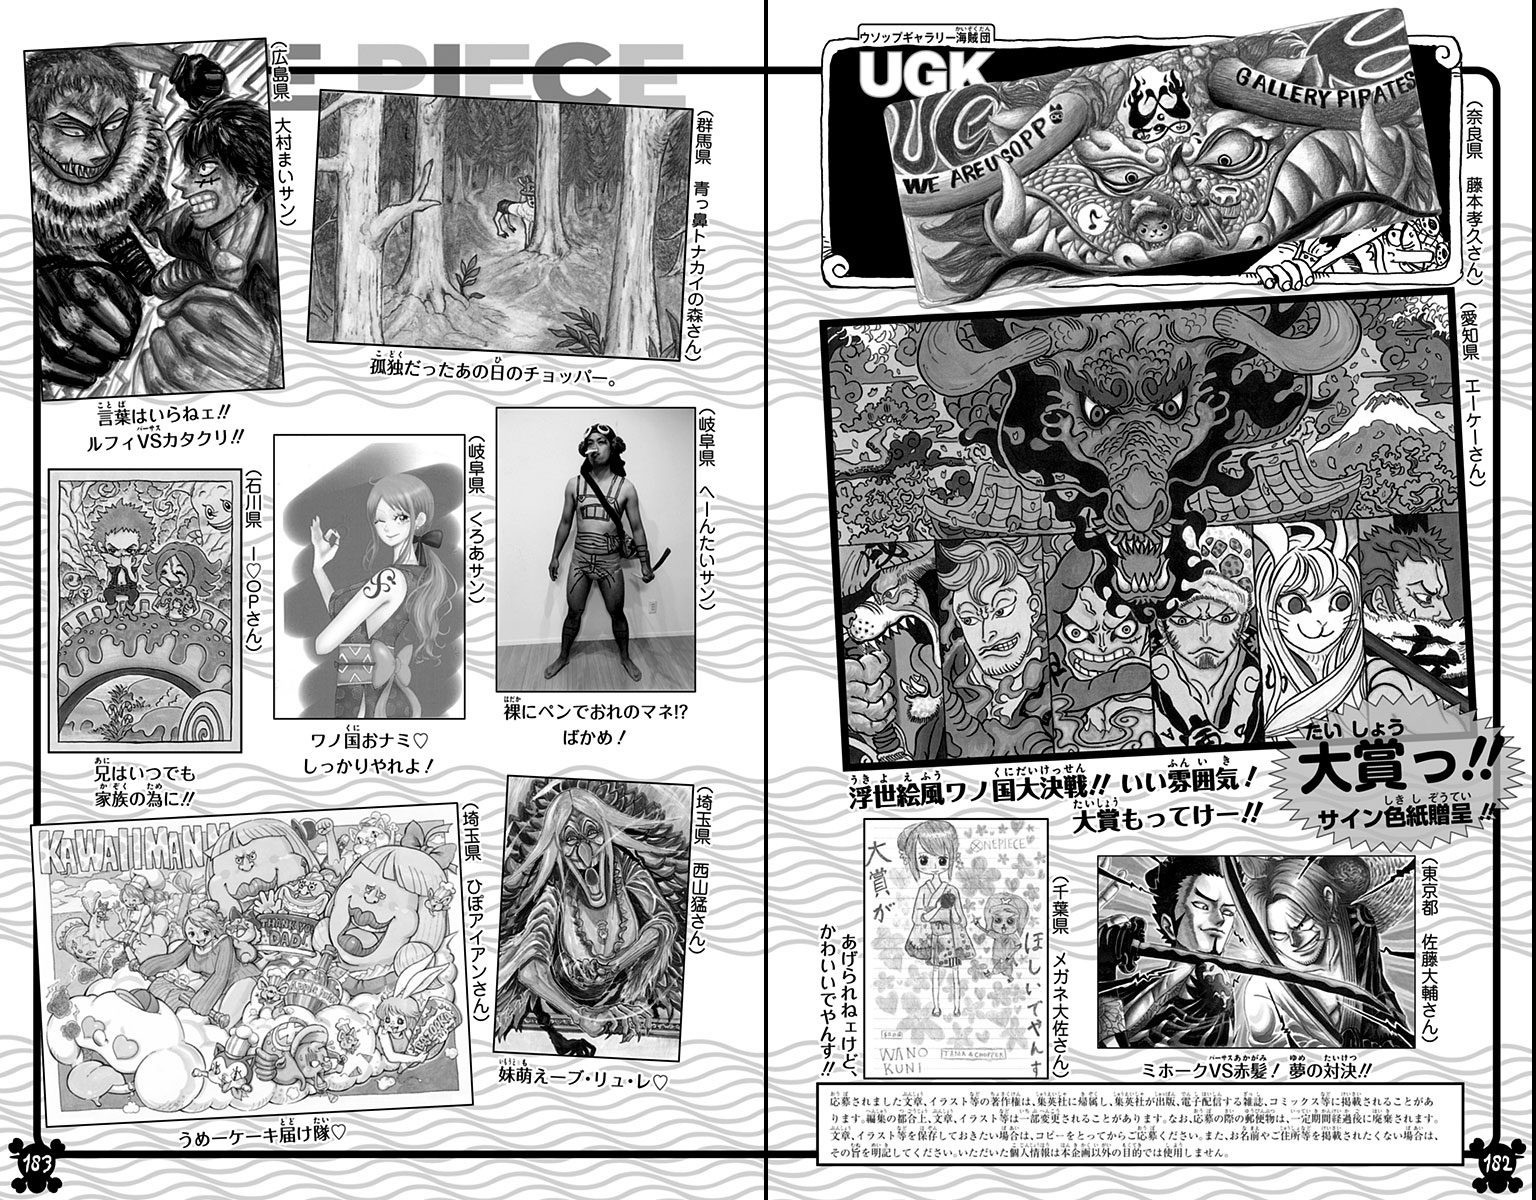 One Piece 1022 Chapter Spoilers, Manga Raw Scans Released